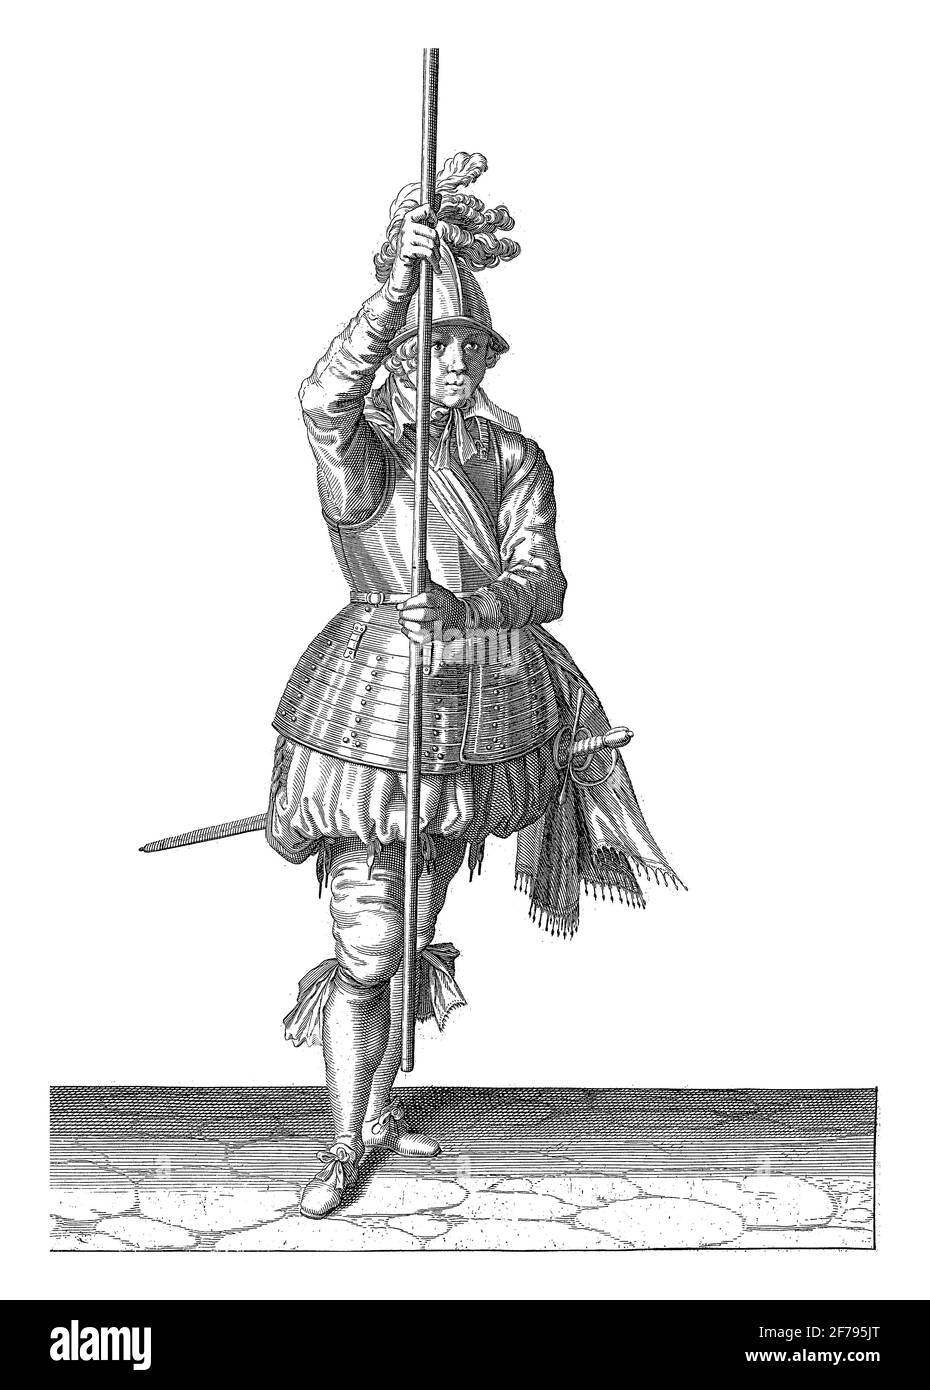 A full-length soldier holding a skewer (lance) with both hands upright in front of him slightly above the ground, This is the first act of lifting the Stock Photo